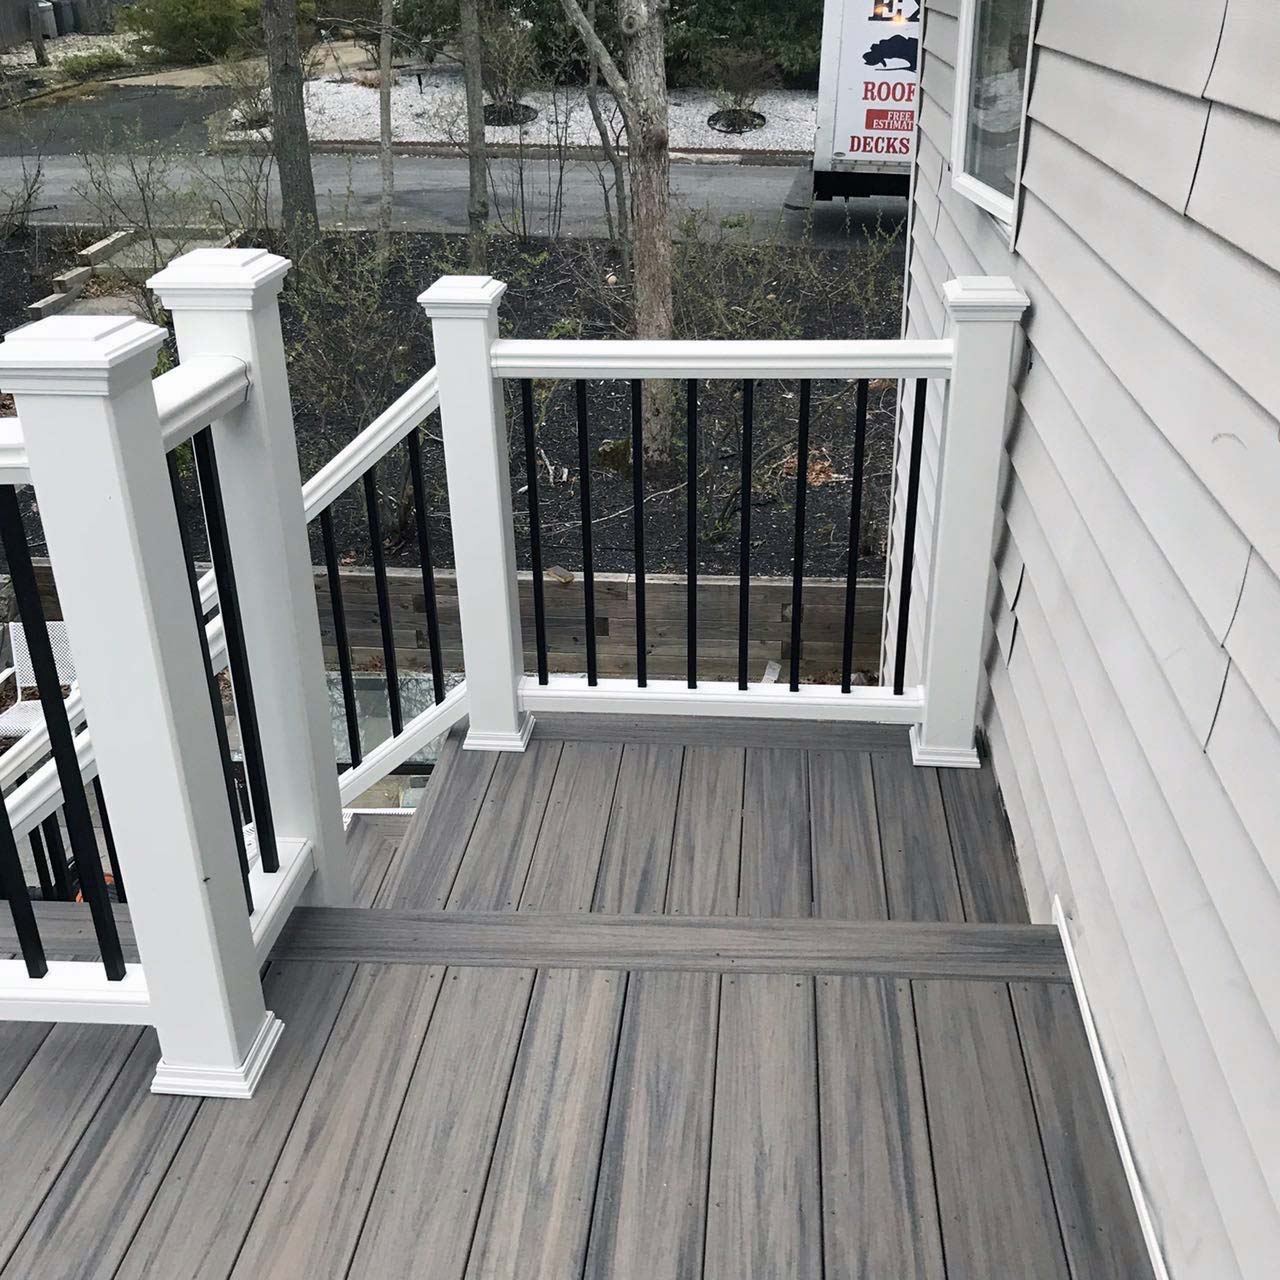 New Wood Deck With A View